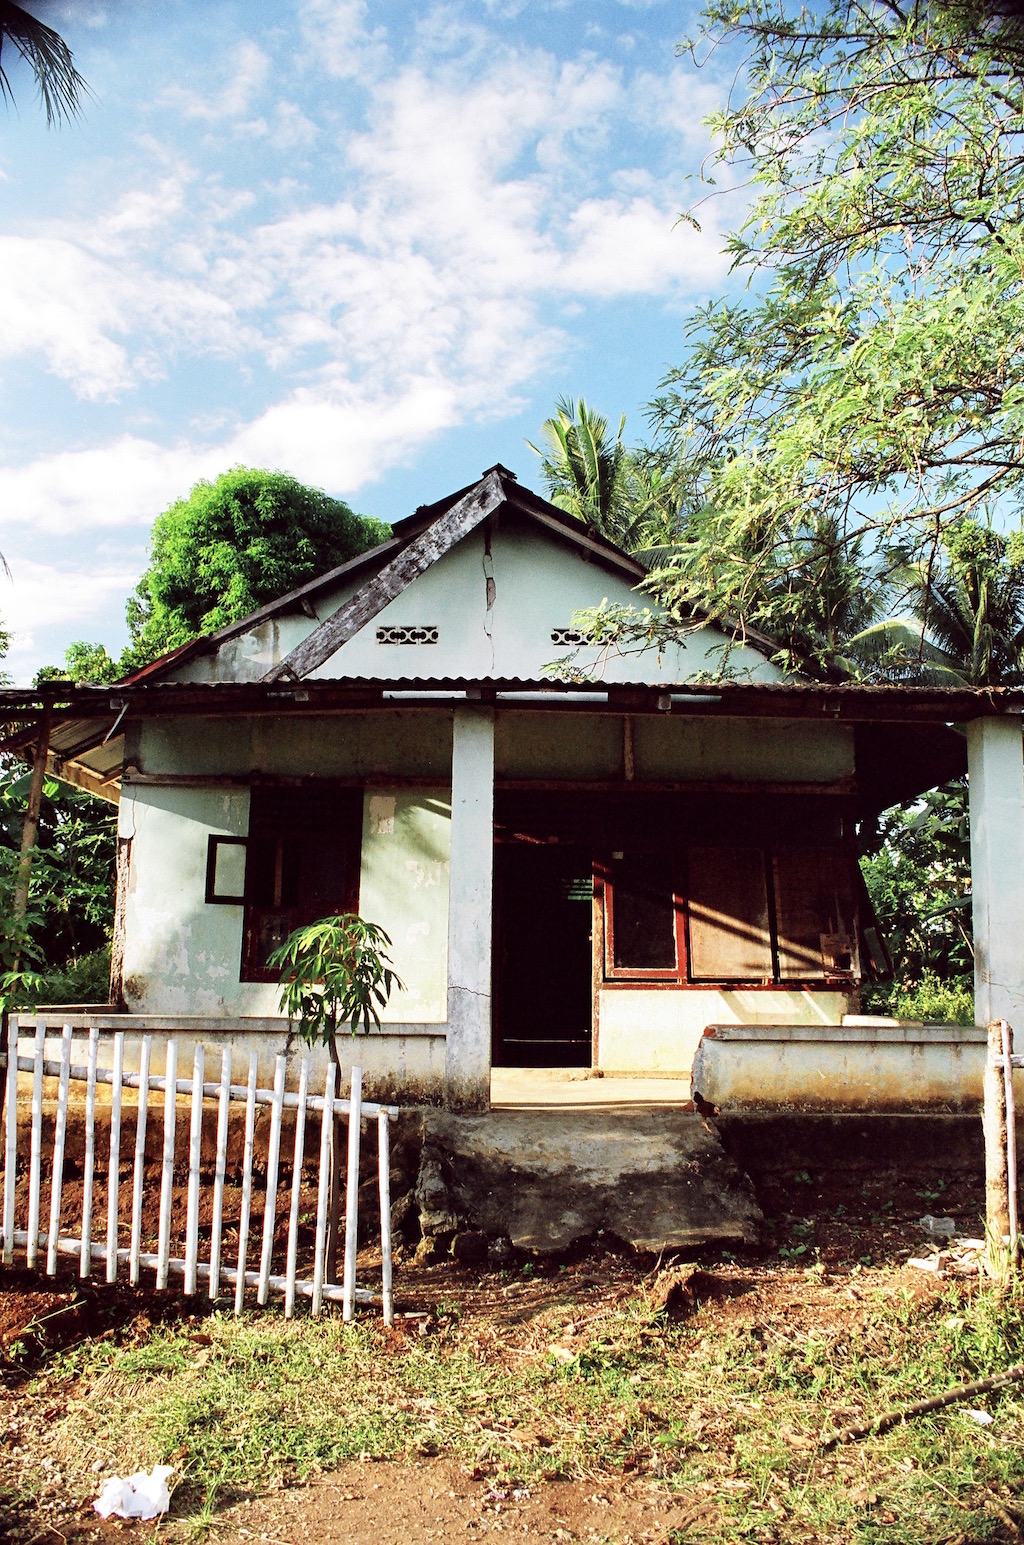 A dilapidated house in Manado